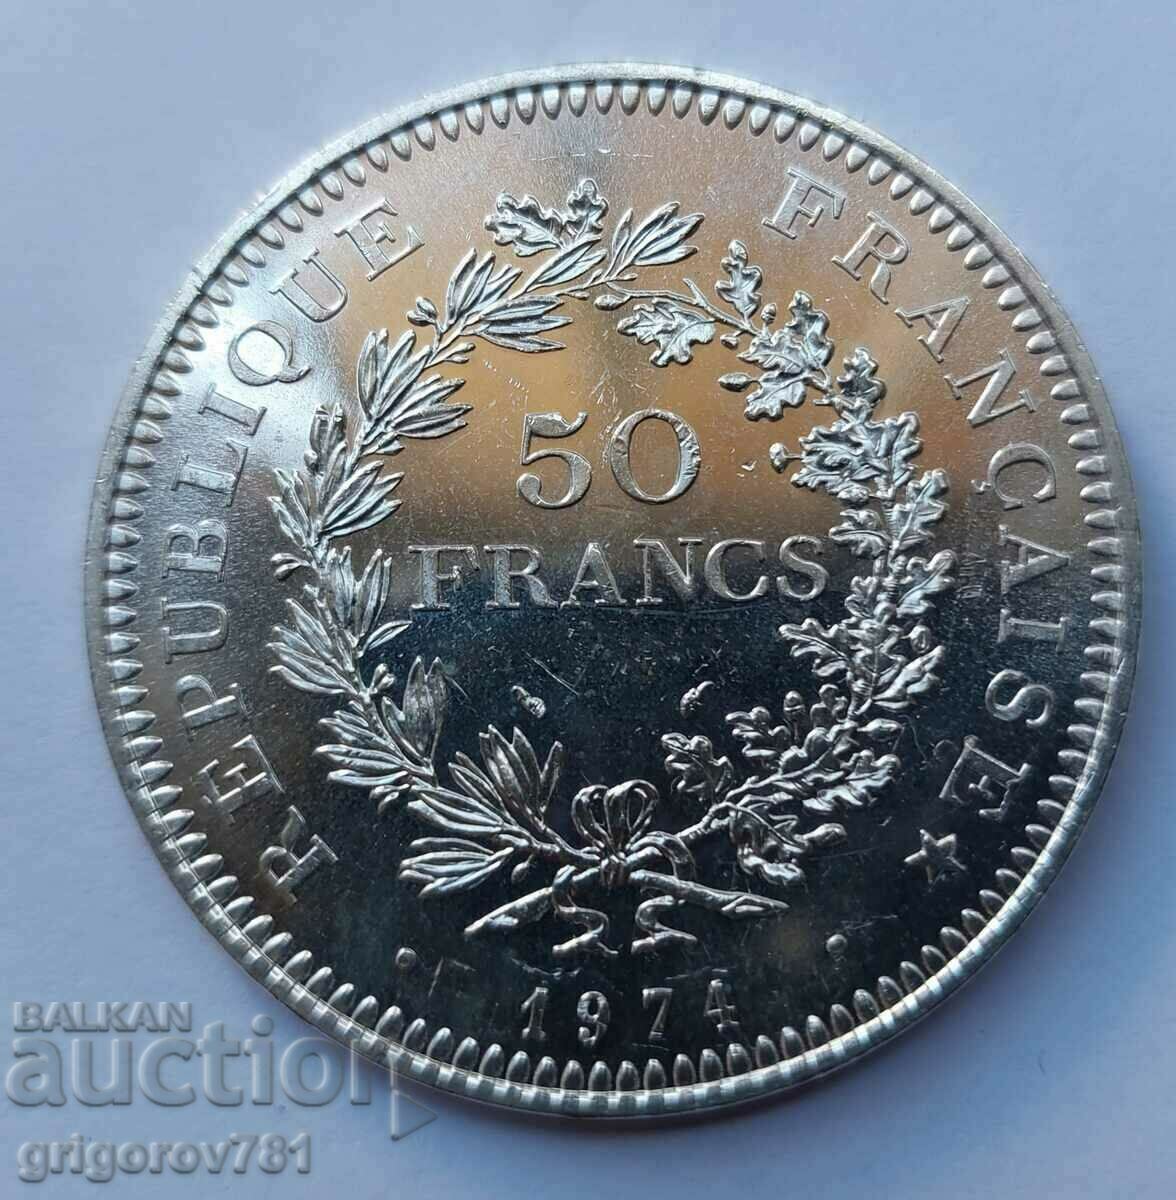 50 Francs Silver France 1974 - Silver Coin #10